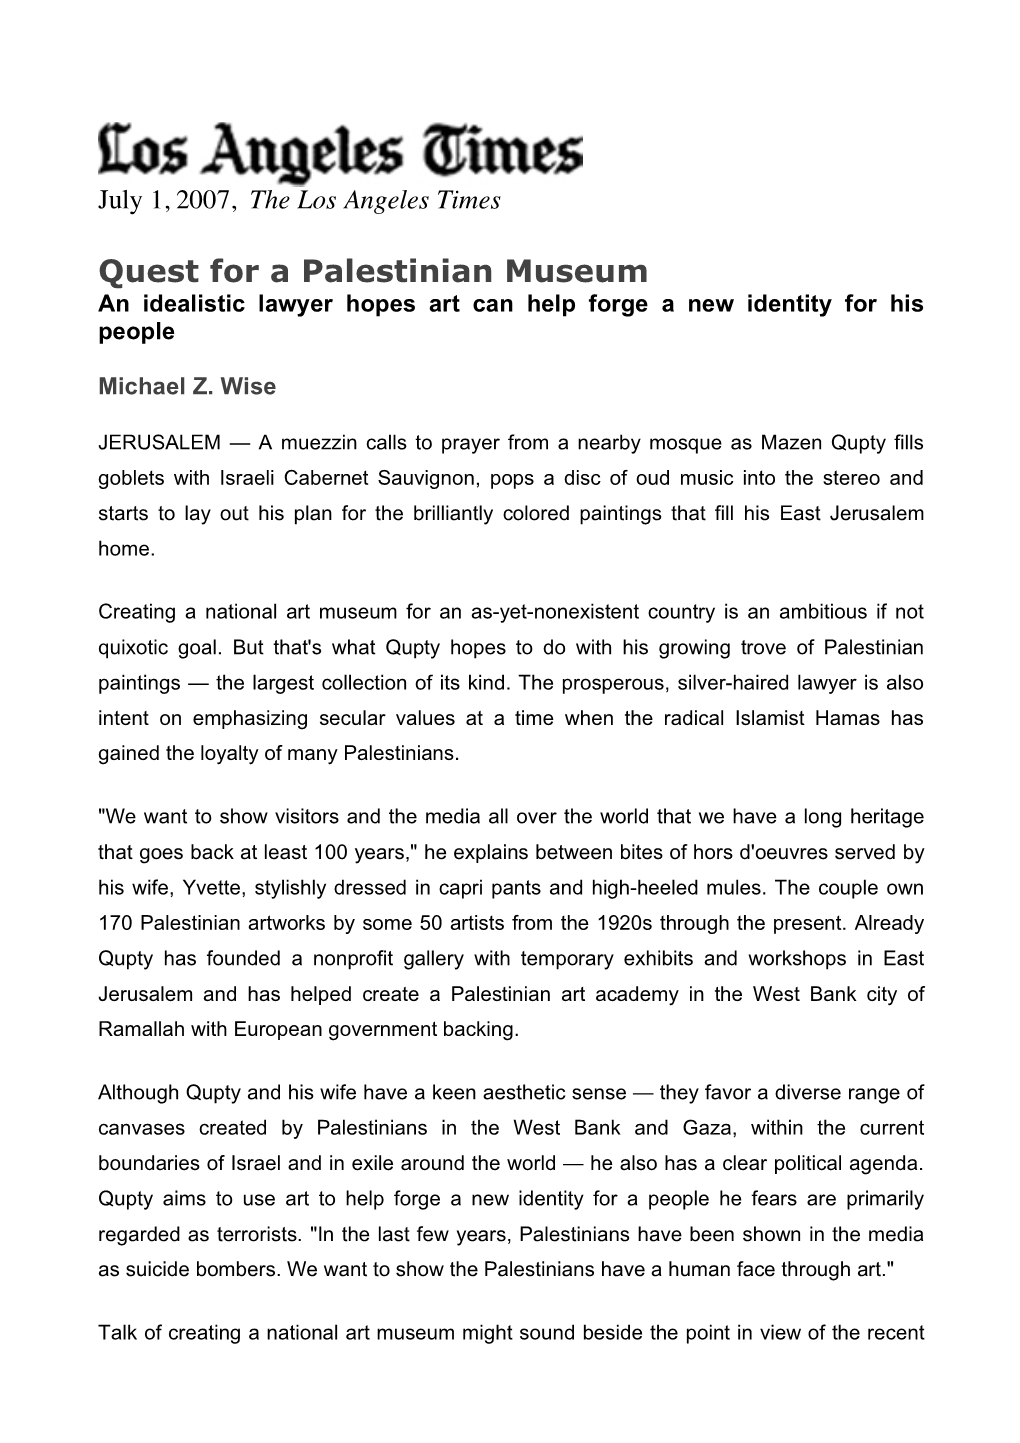 Quest for a Palestinian Museum an Idealistic Lawyer Hopes Art Can Help Forge a New Identity for His People